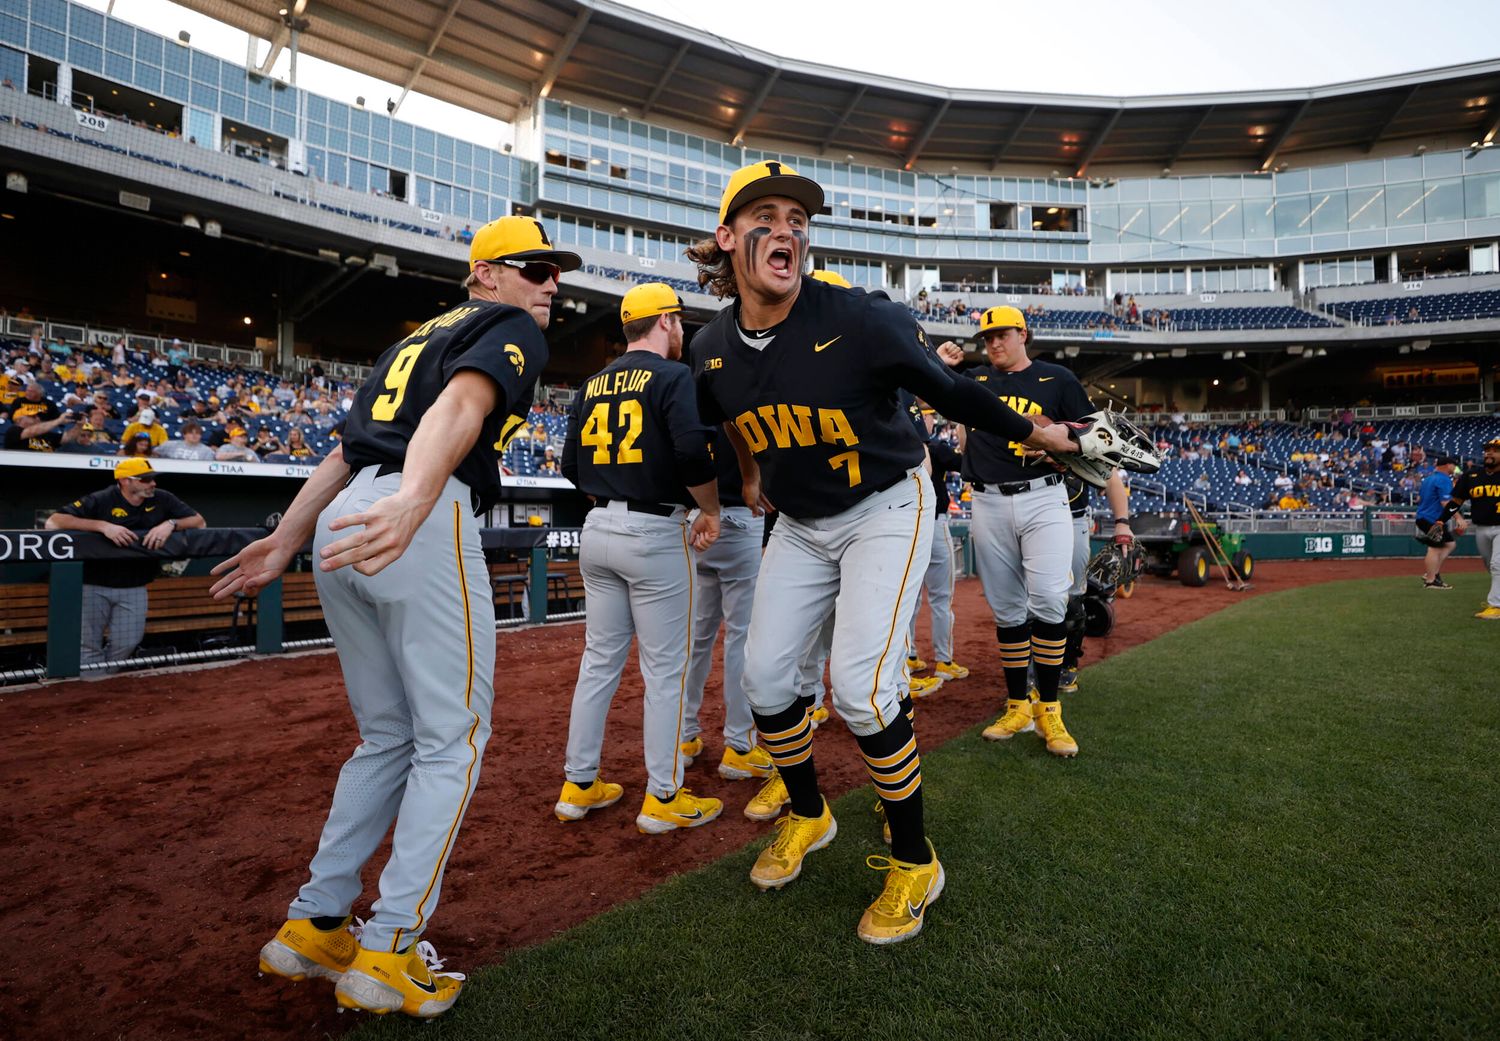 Photos: Ranking best uniforms we could see in Big Ten baseball tourney -  Big Ten Network